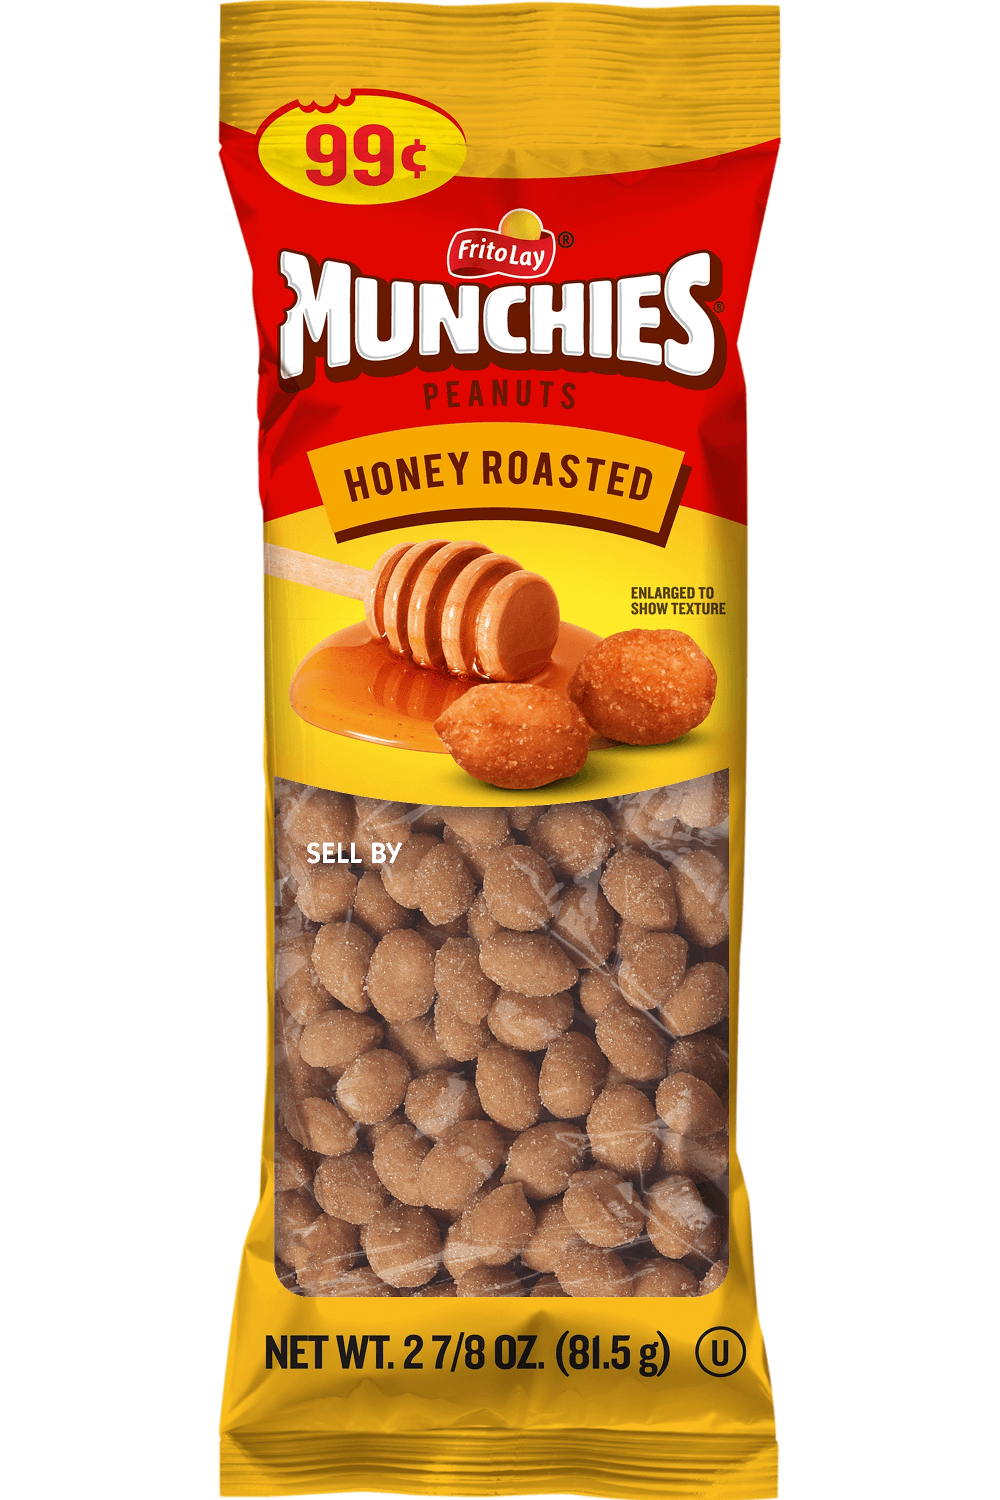 https://www.fritolay.com/sites/fritolay.com/files/2021-04/munchies-honey-roasted-peanuts.png